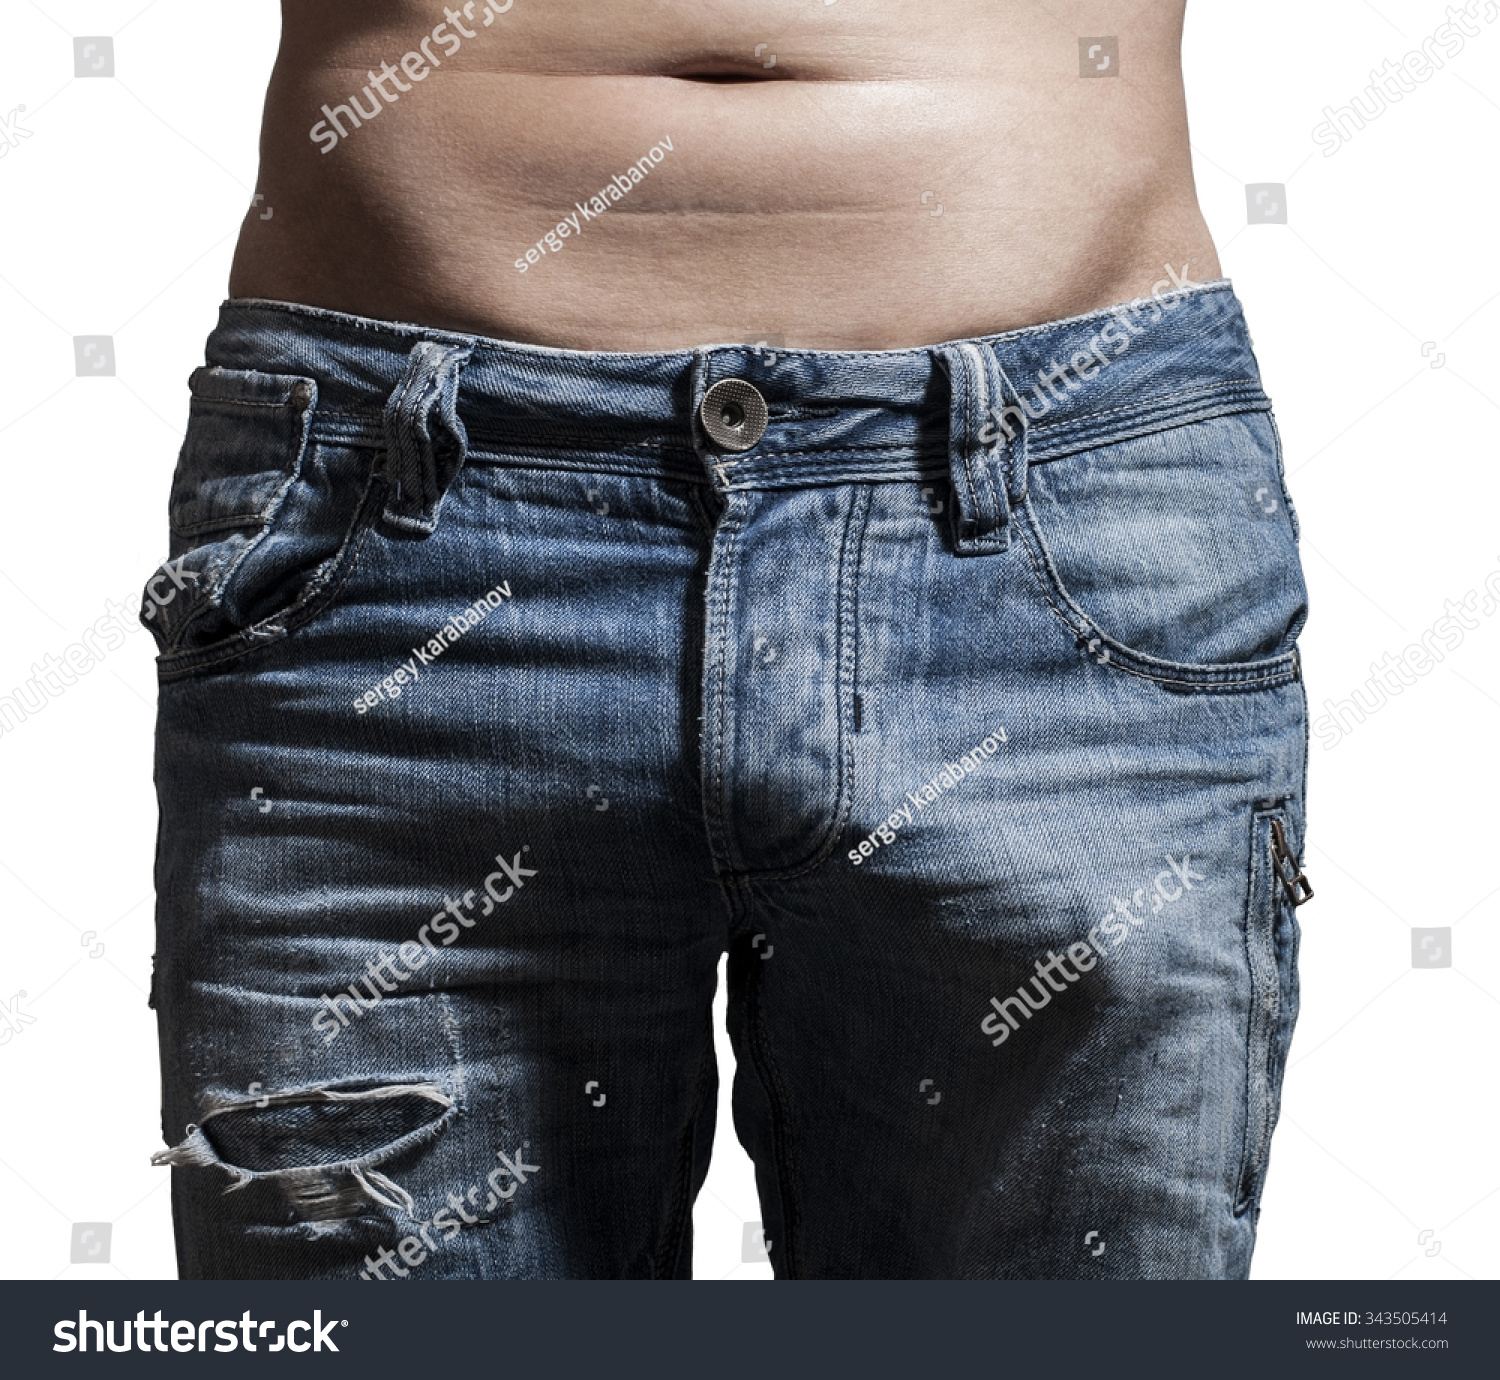 What Does An Erection Look Like In Jeans on market